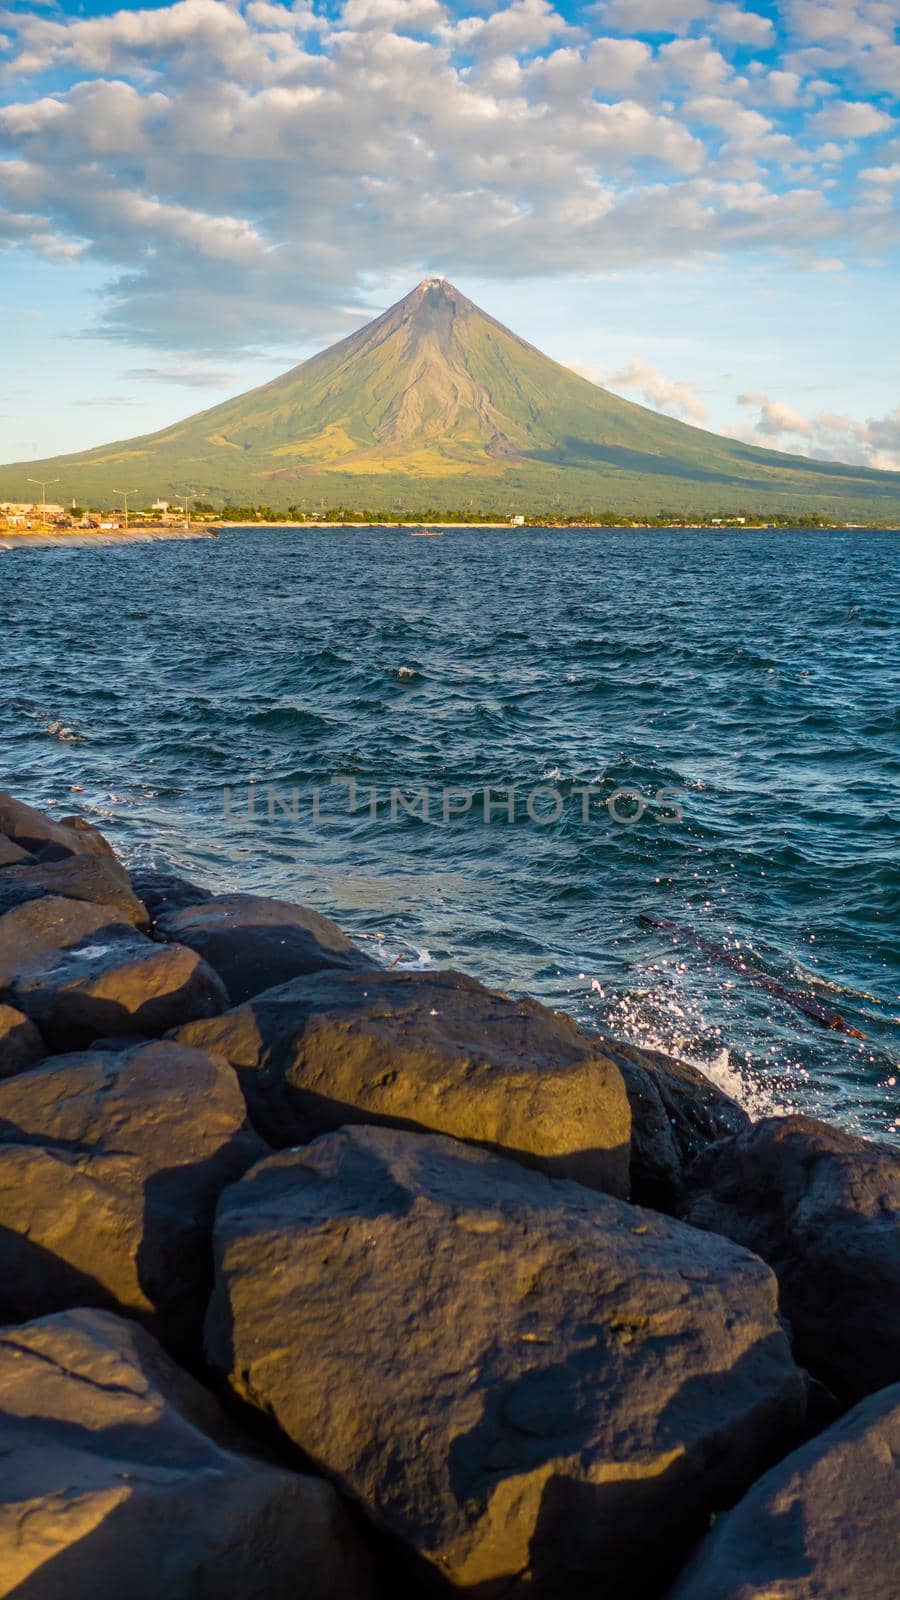 Mayon Volcano is an active stratovolcano in the province of Albay in Bicol Region, on the island of Luzon in the Philippines. Renowned as the perfect cone because of its symmetric conical shape. by DovidPro